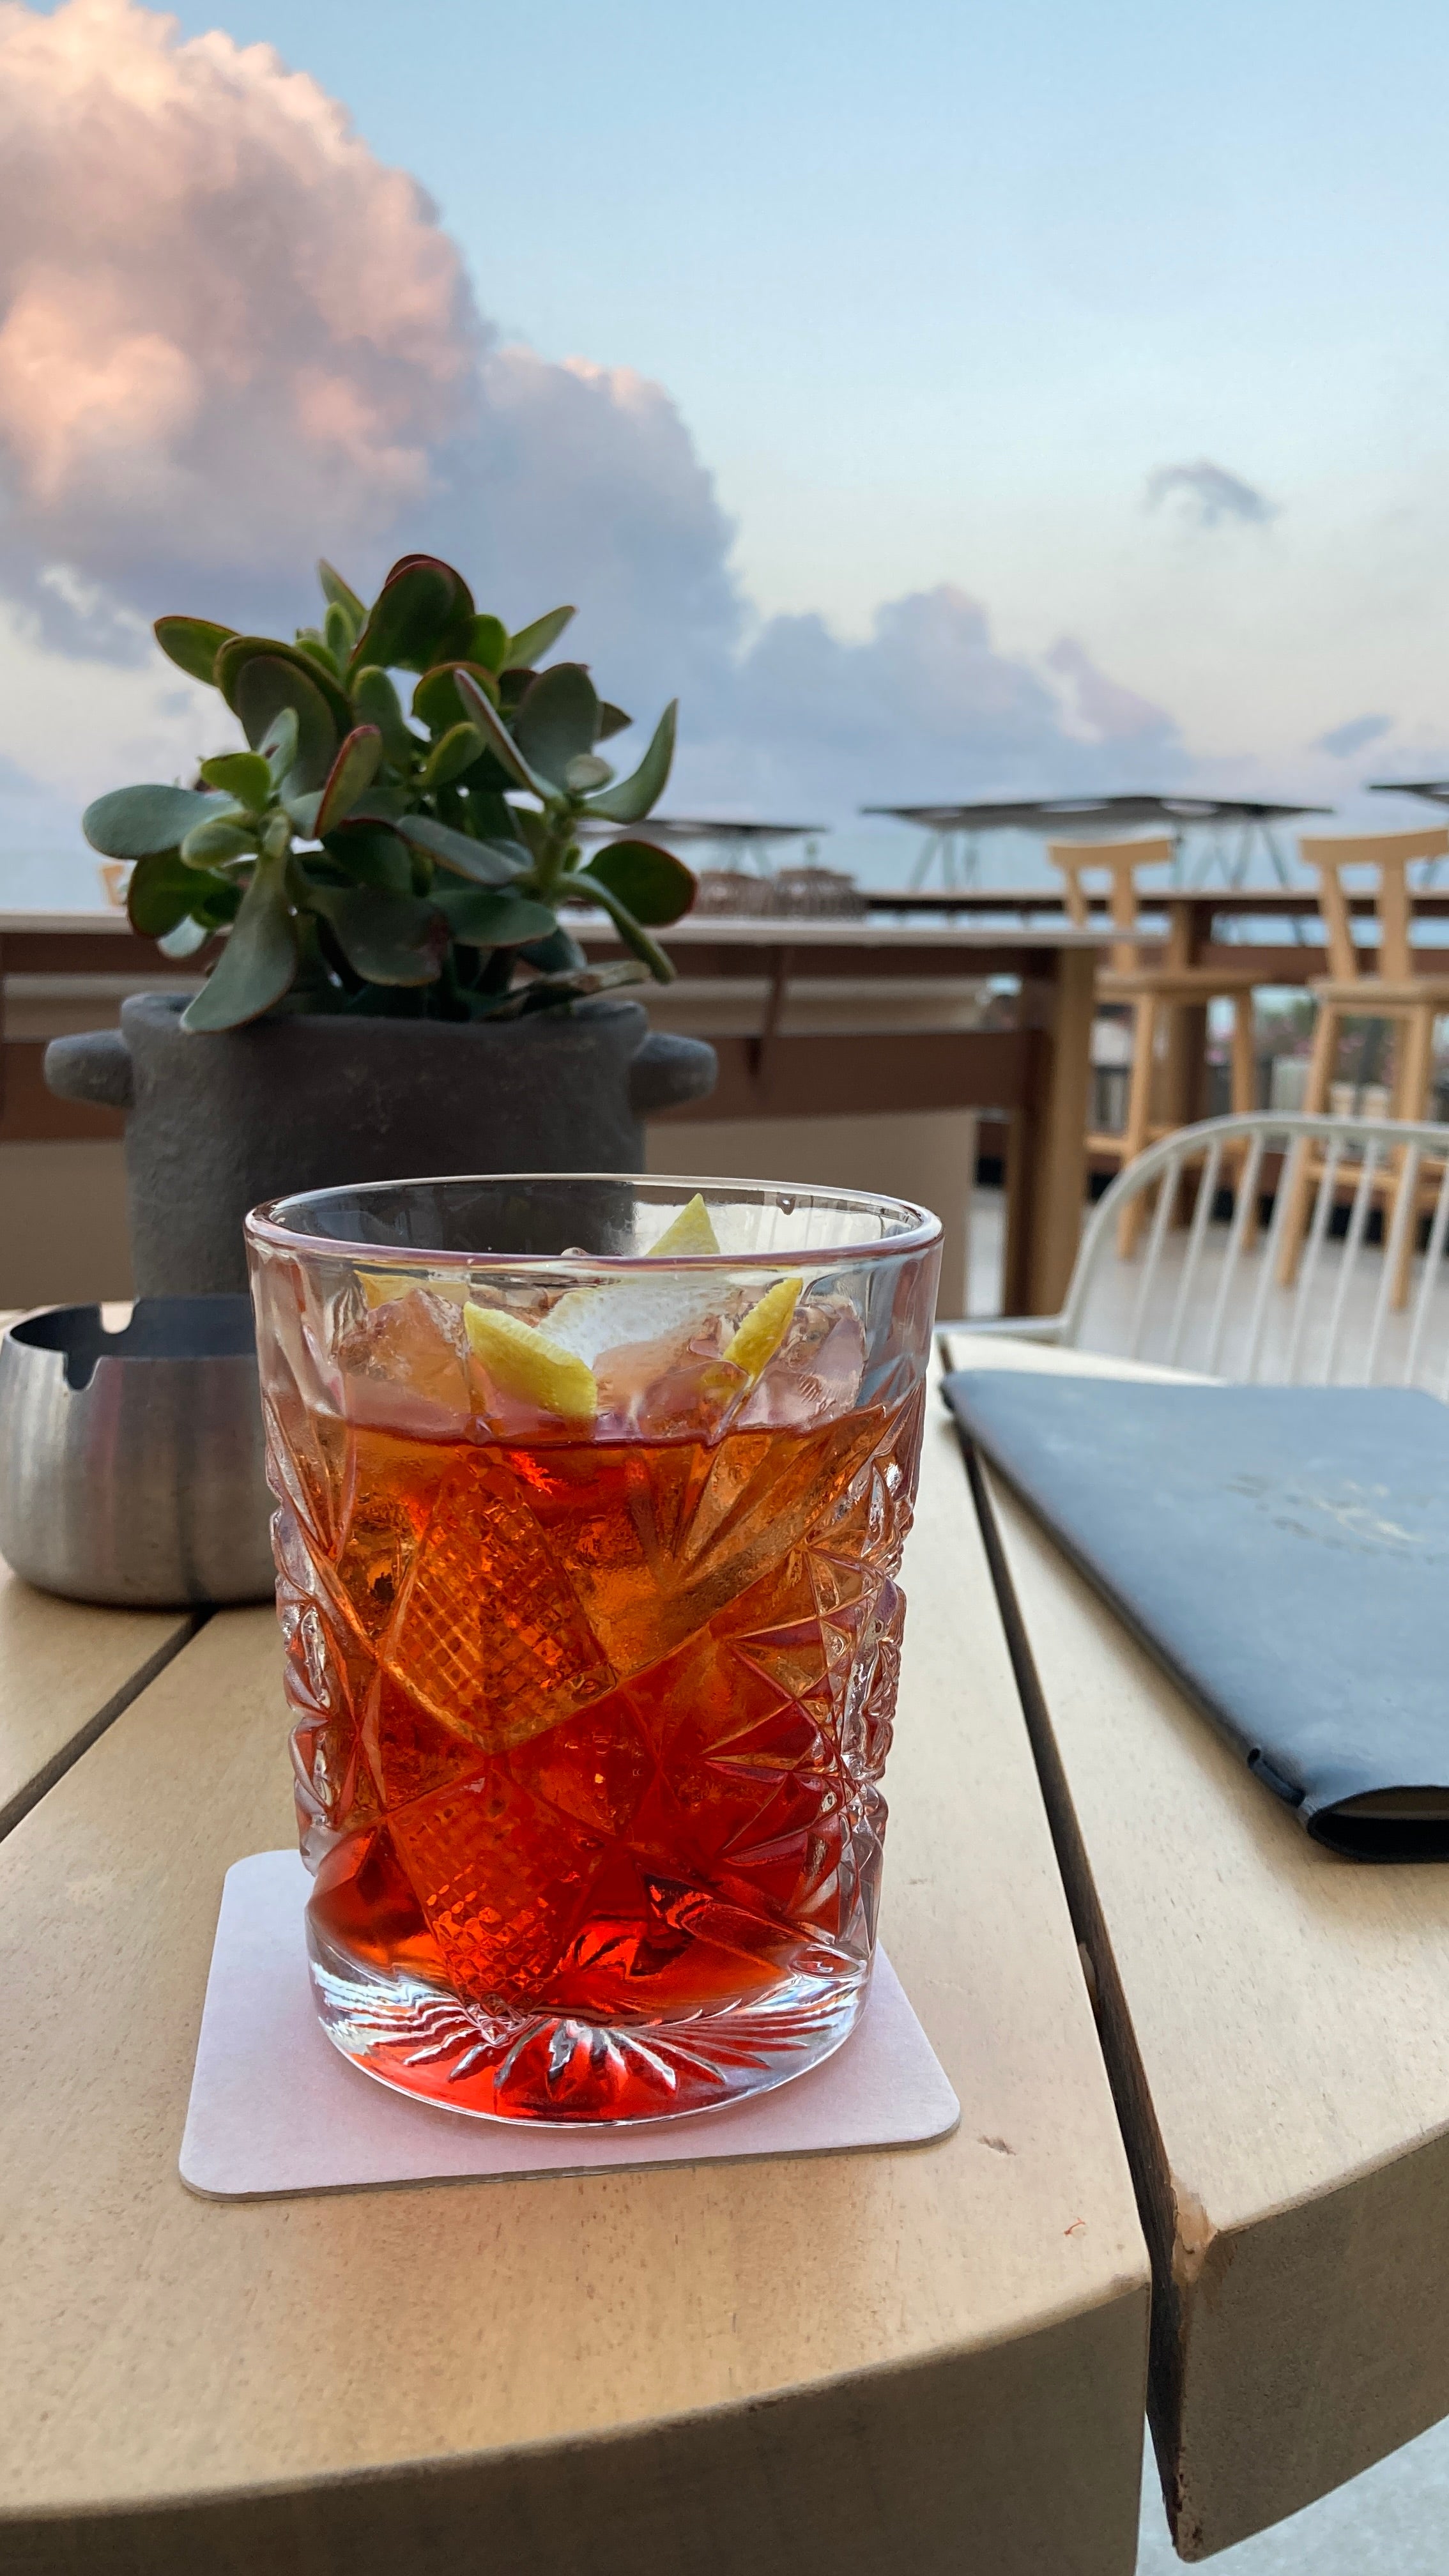 Sunset and a negroni – not a bad way to end a day in Crete